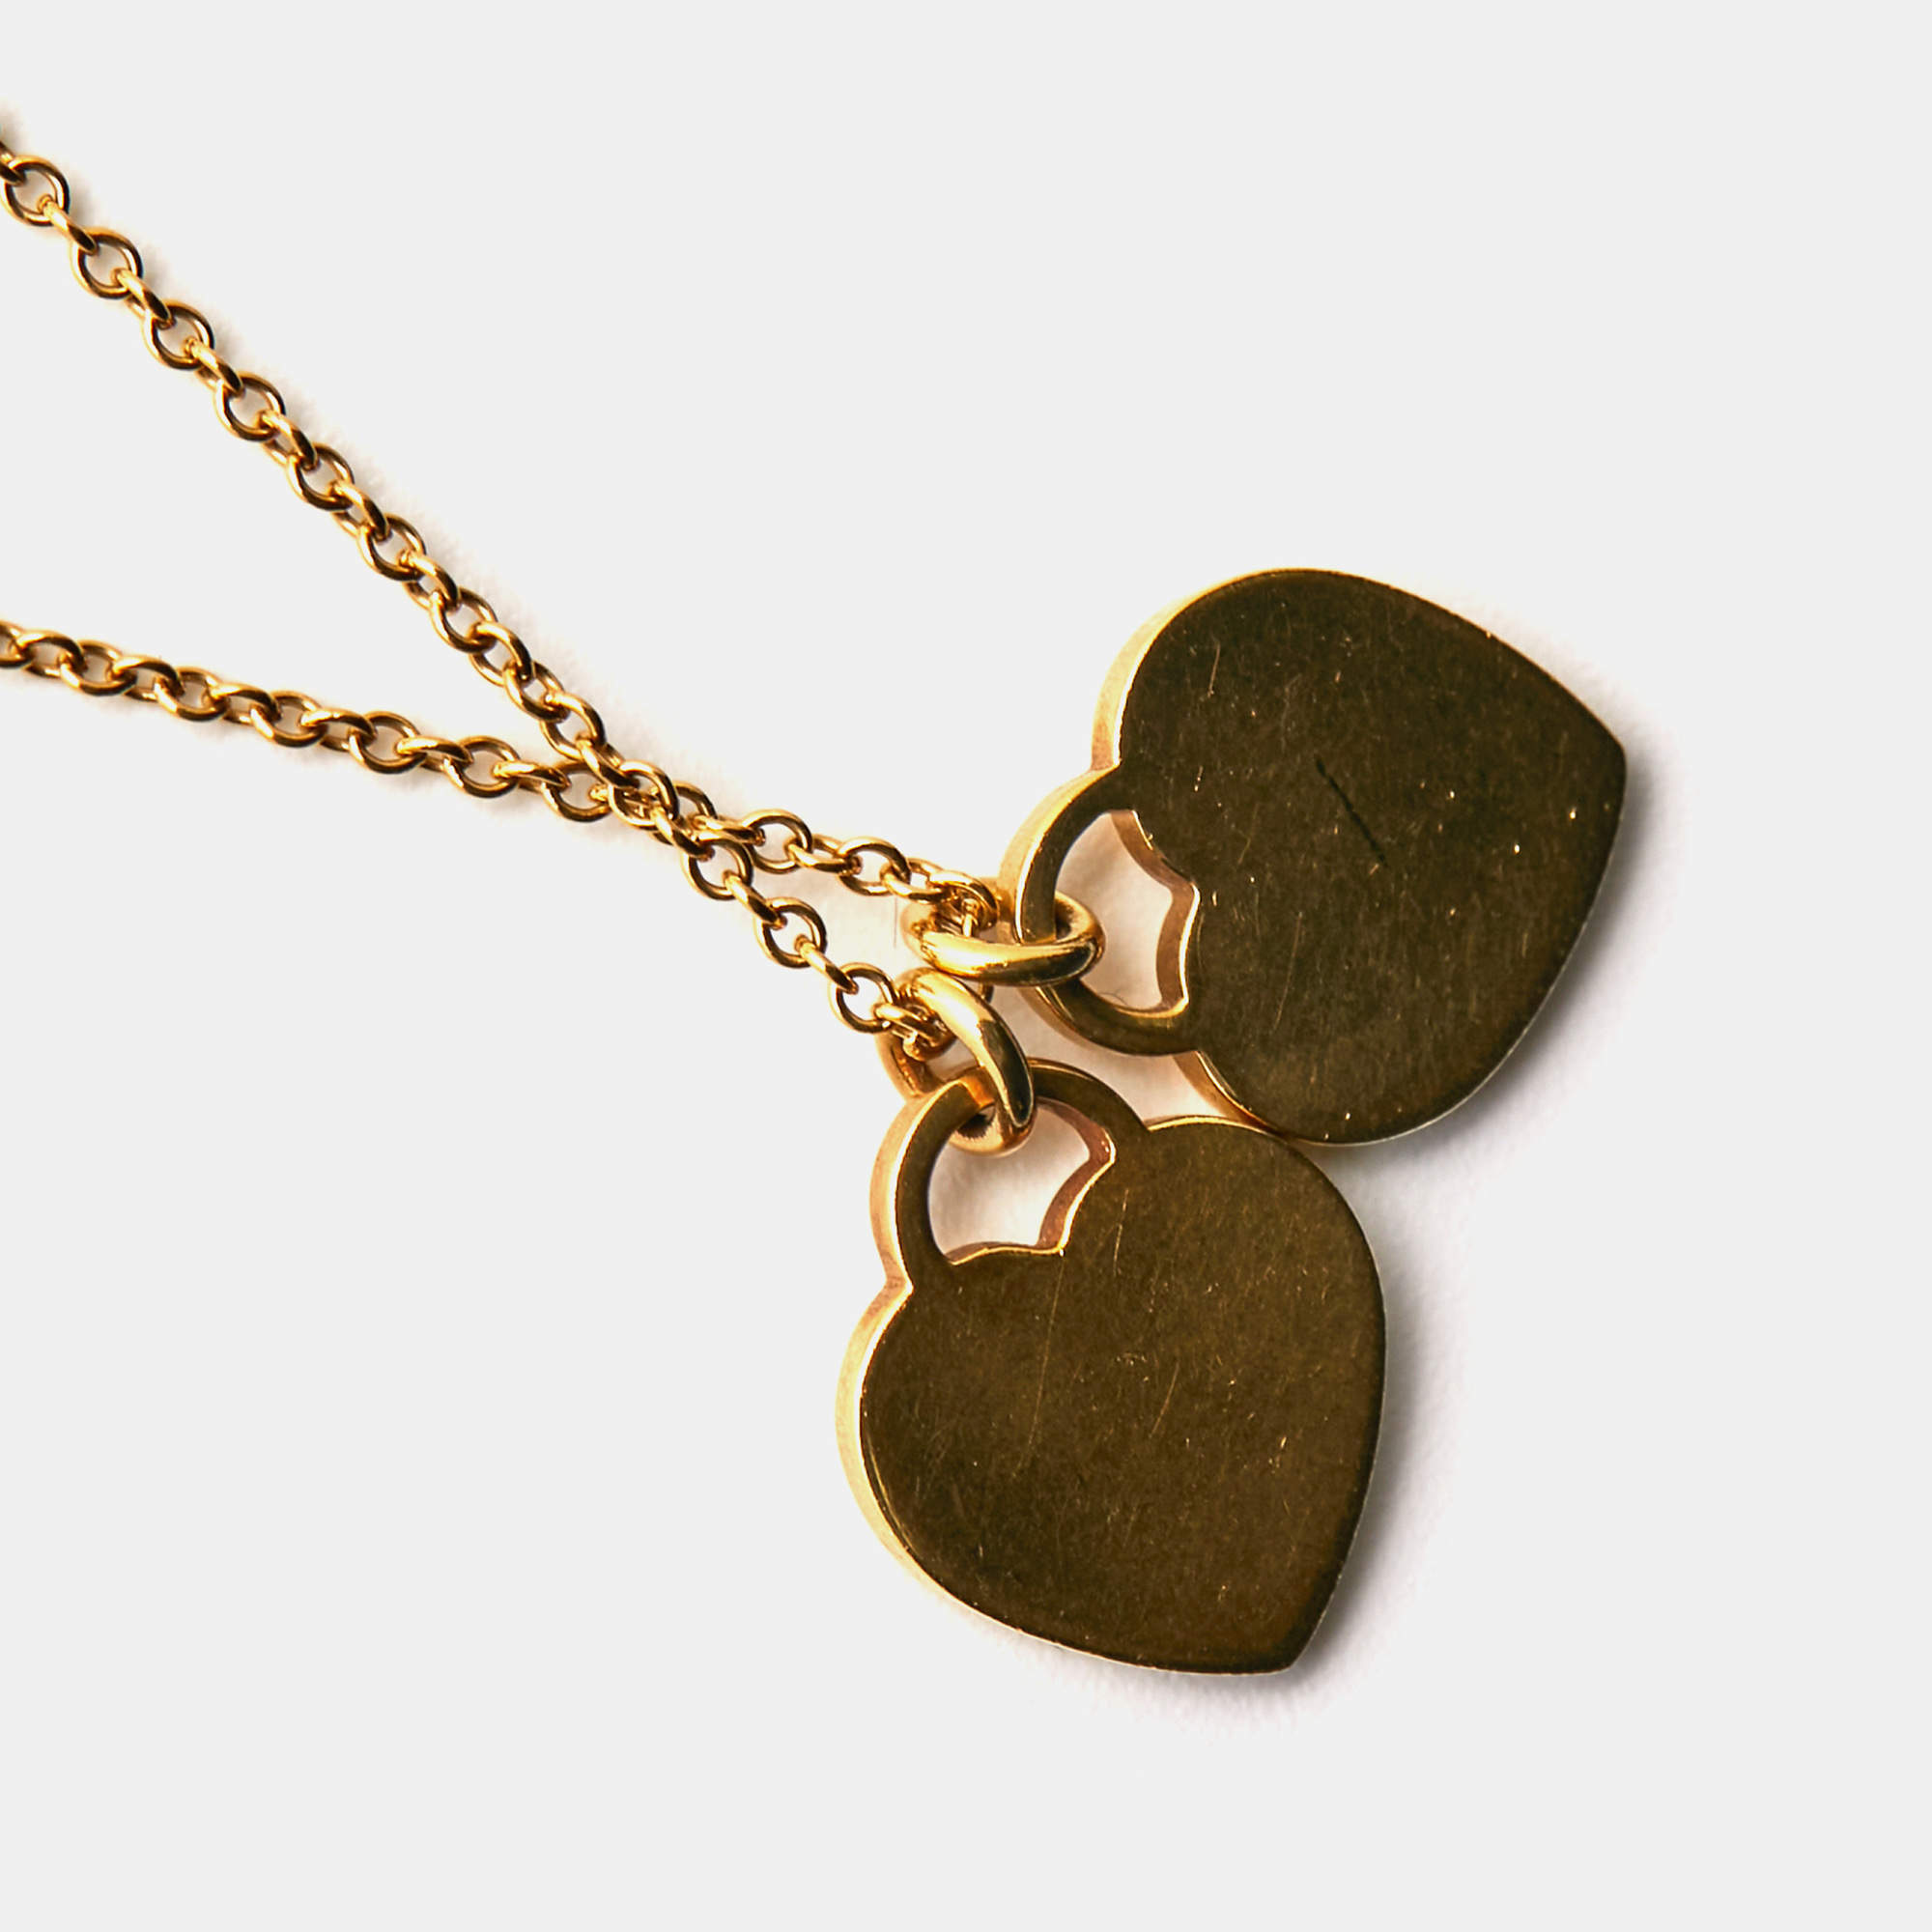 Return to Tiffany® Heart Tag Pendant in Yellow Gold